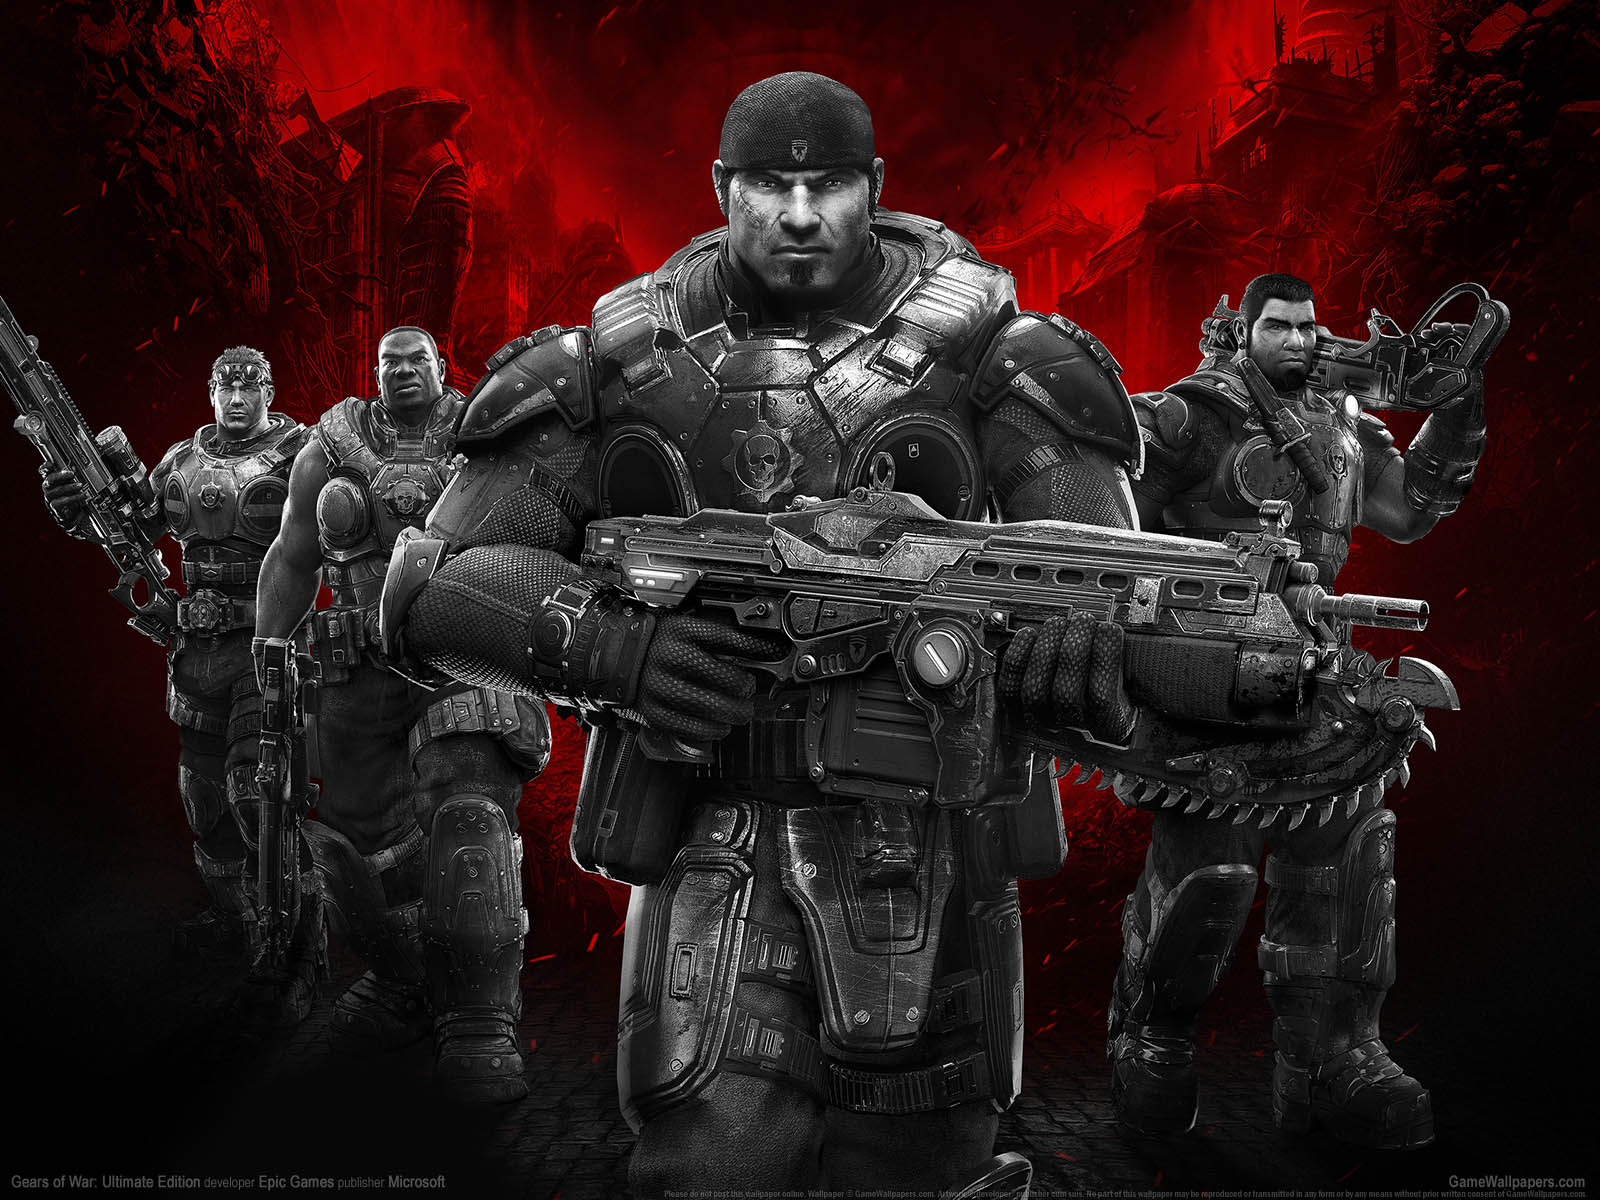 Gears of War%253A Ultimate Edition achtergrond 01 1600x1200